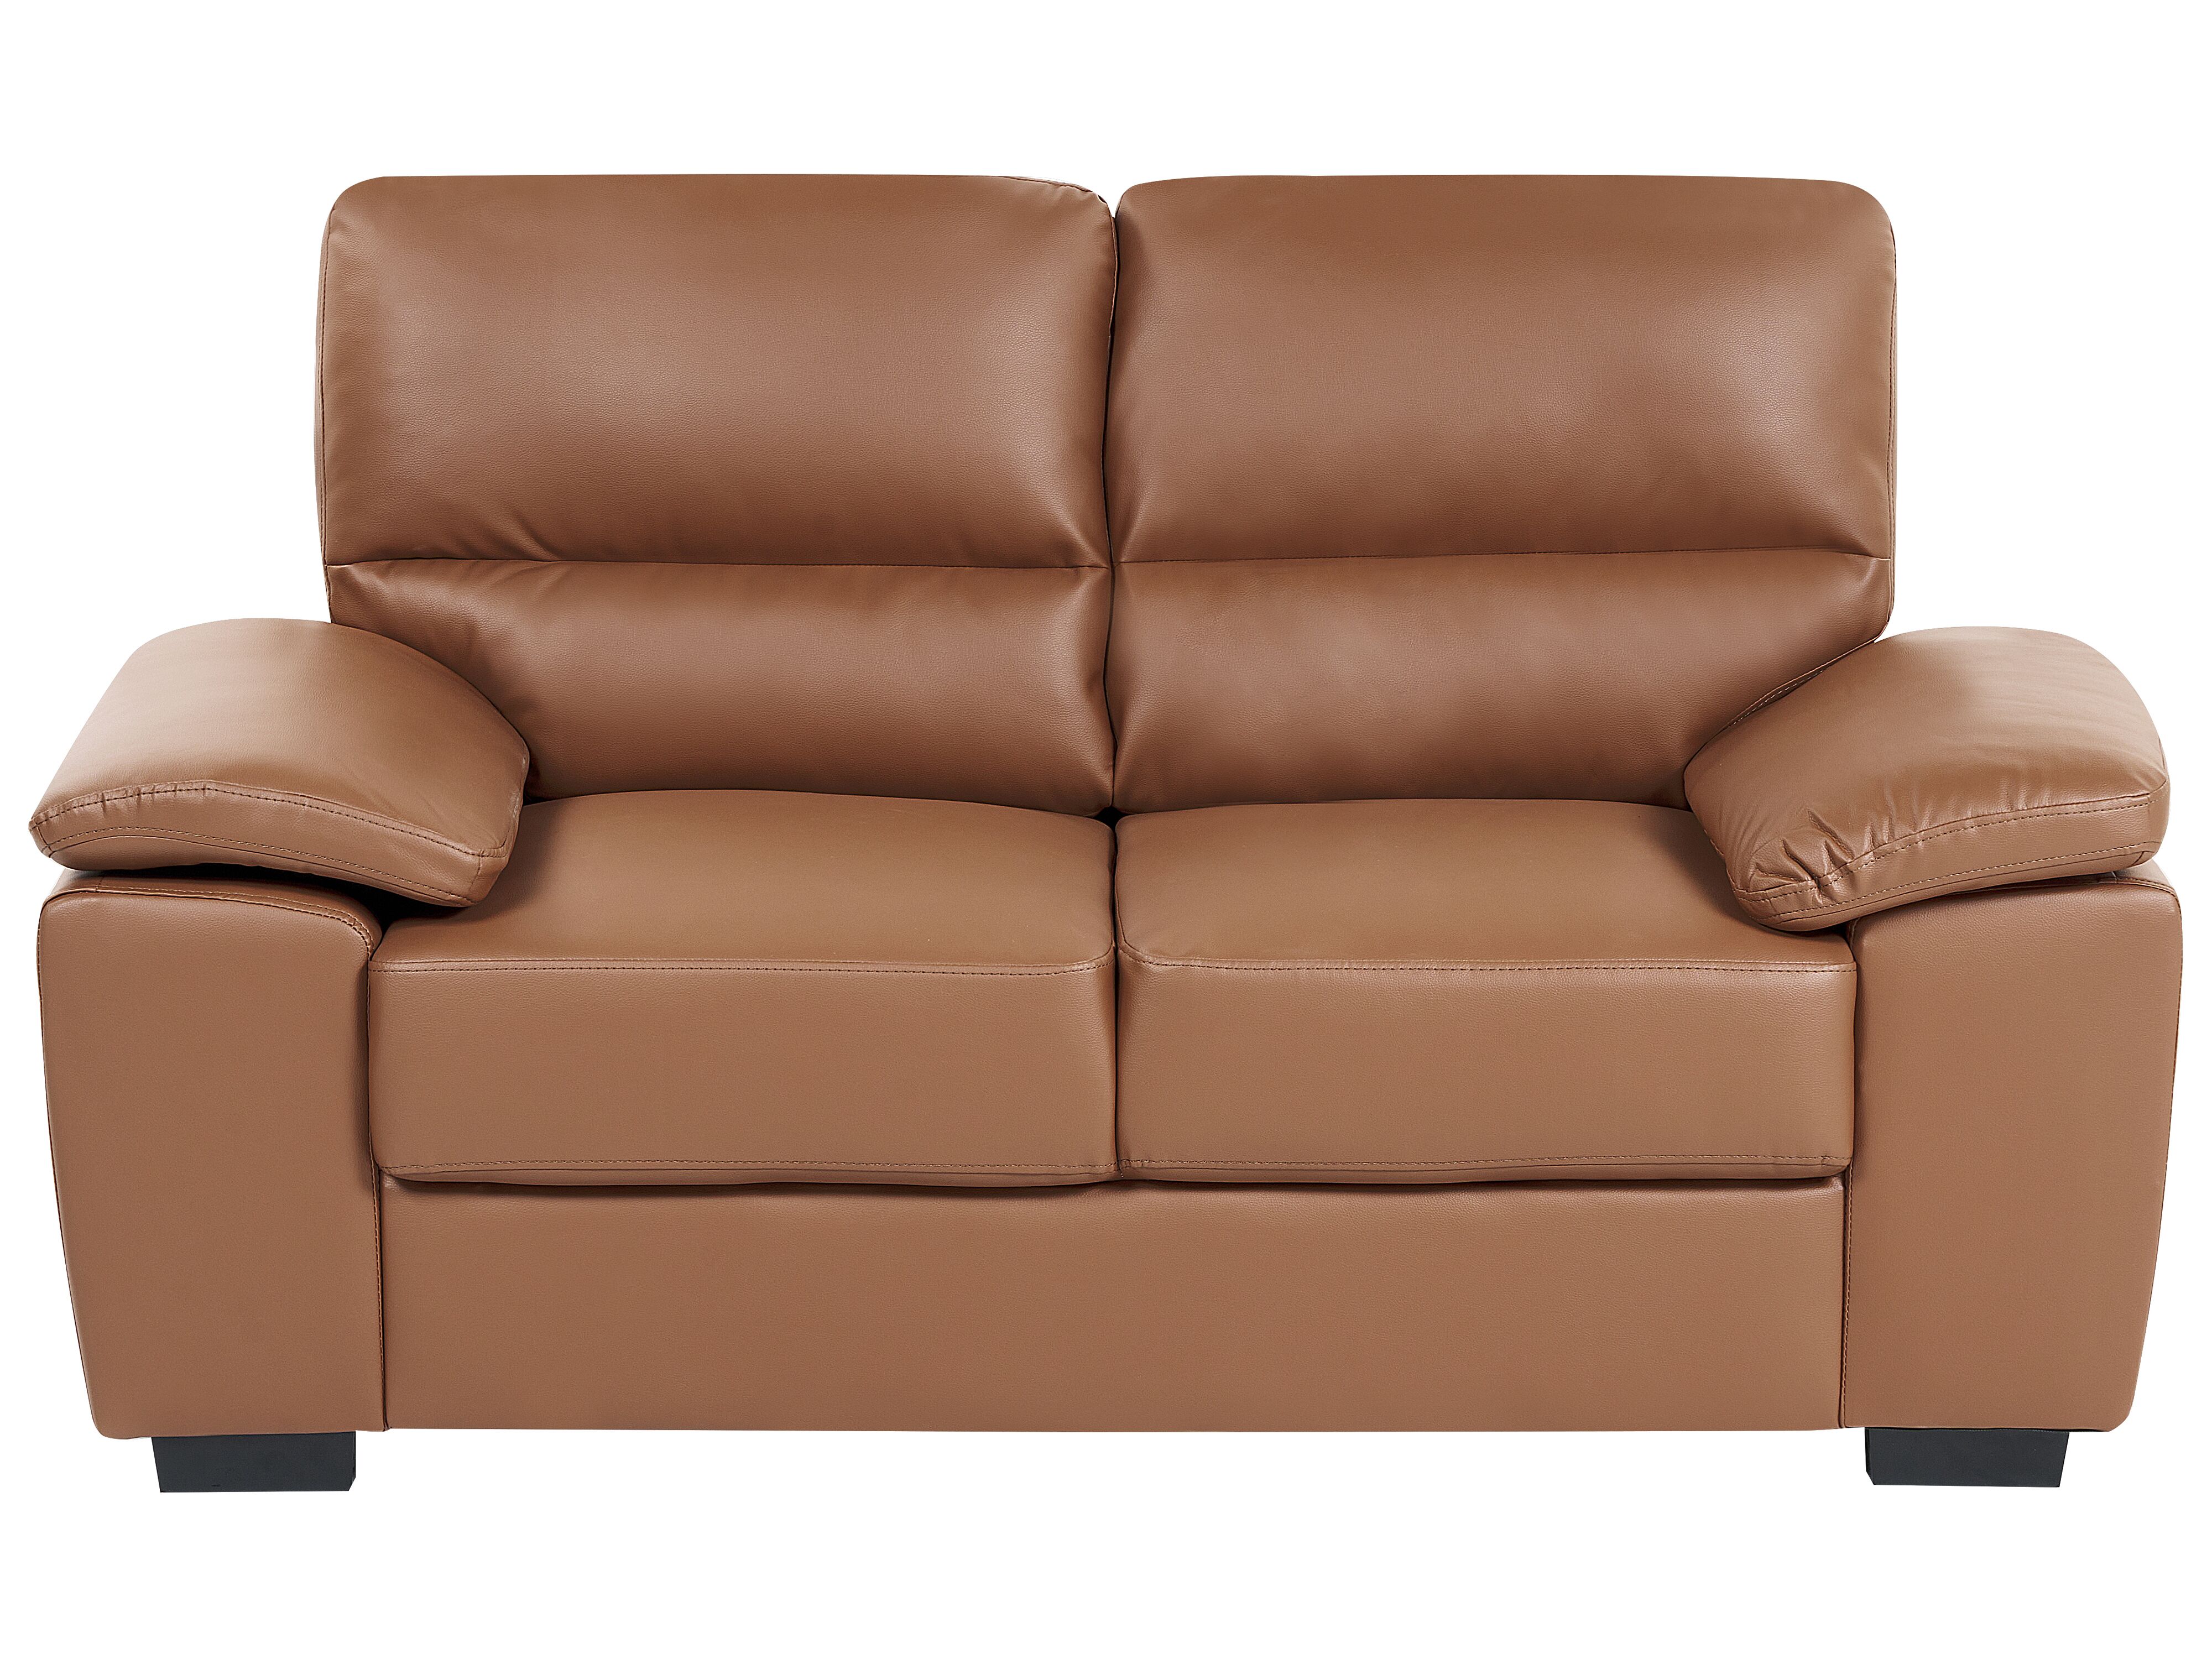 2 Seater Faux Leather Sofa Golden Brown